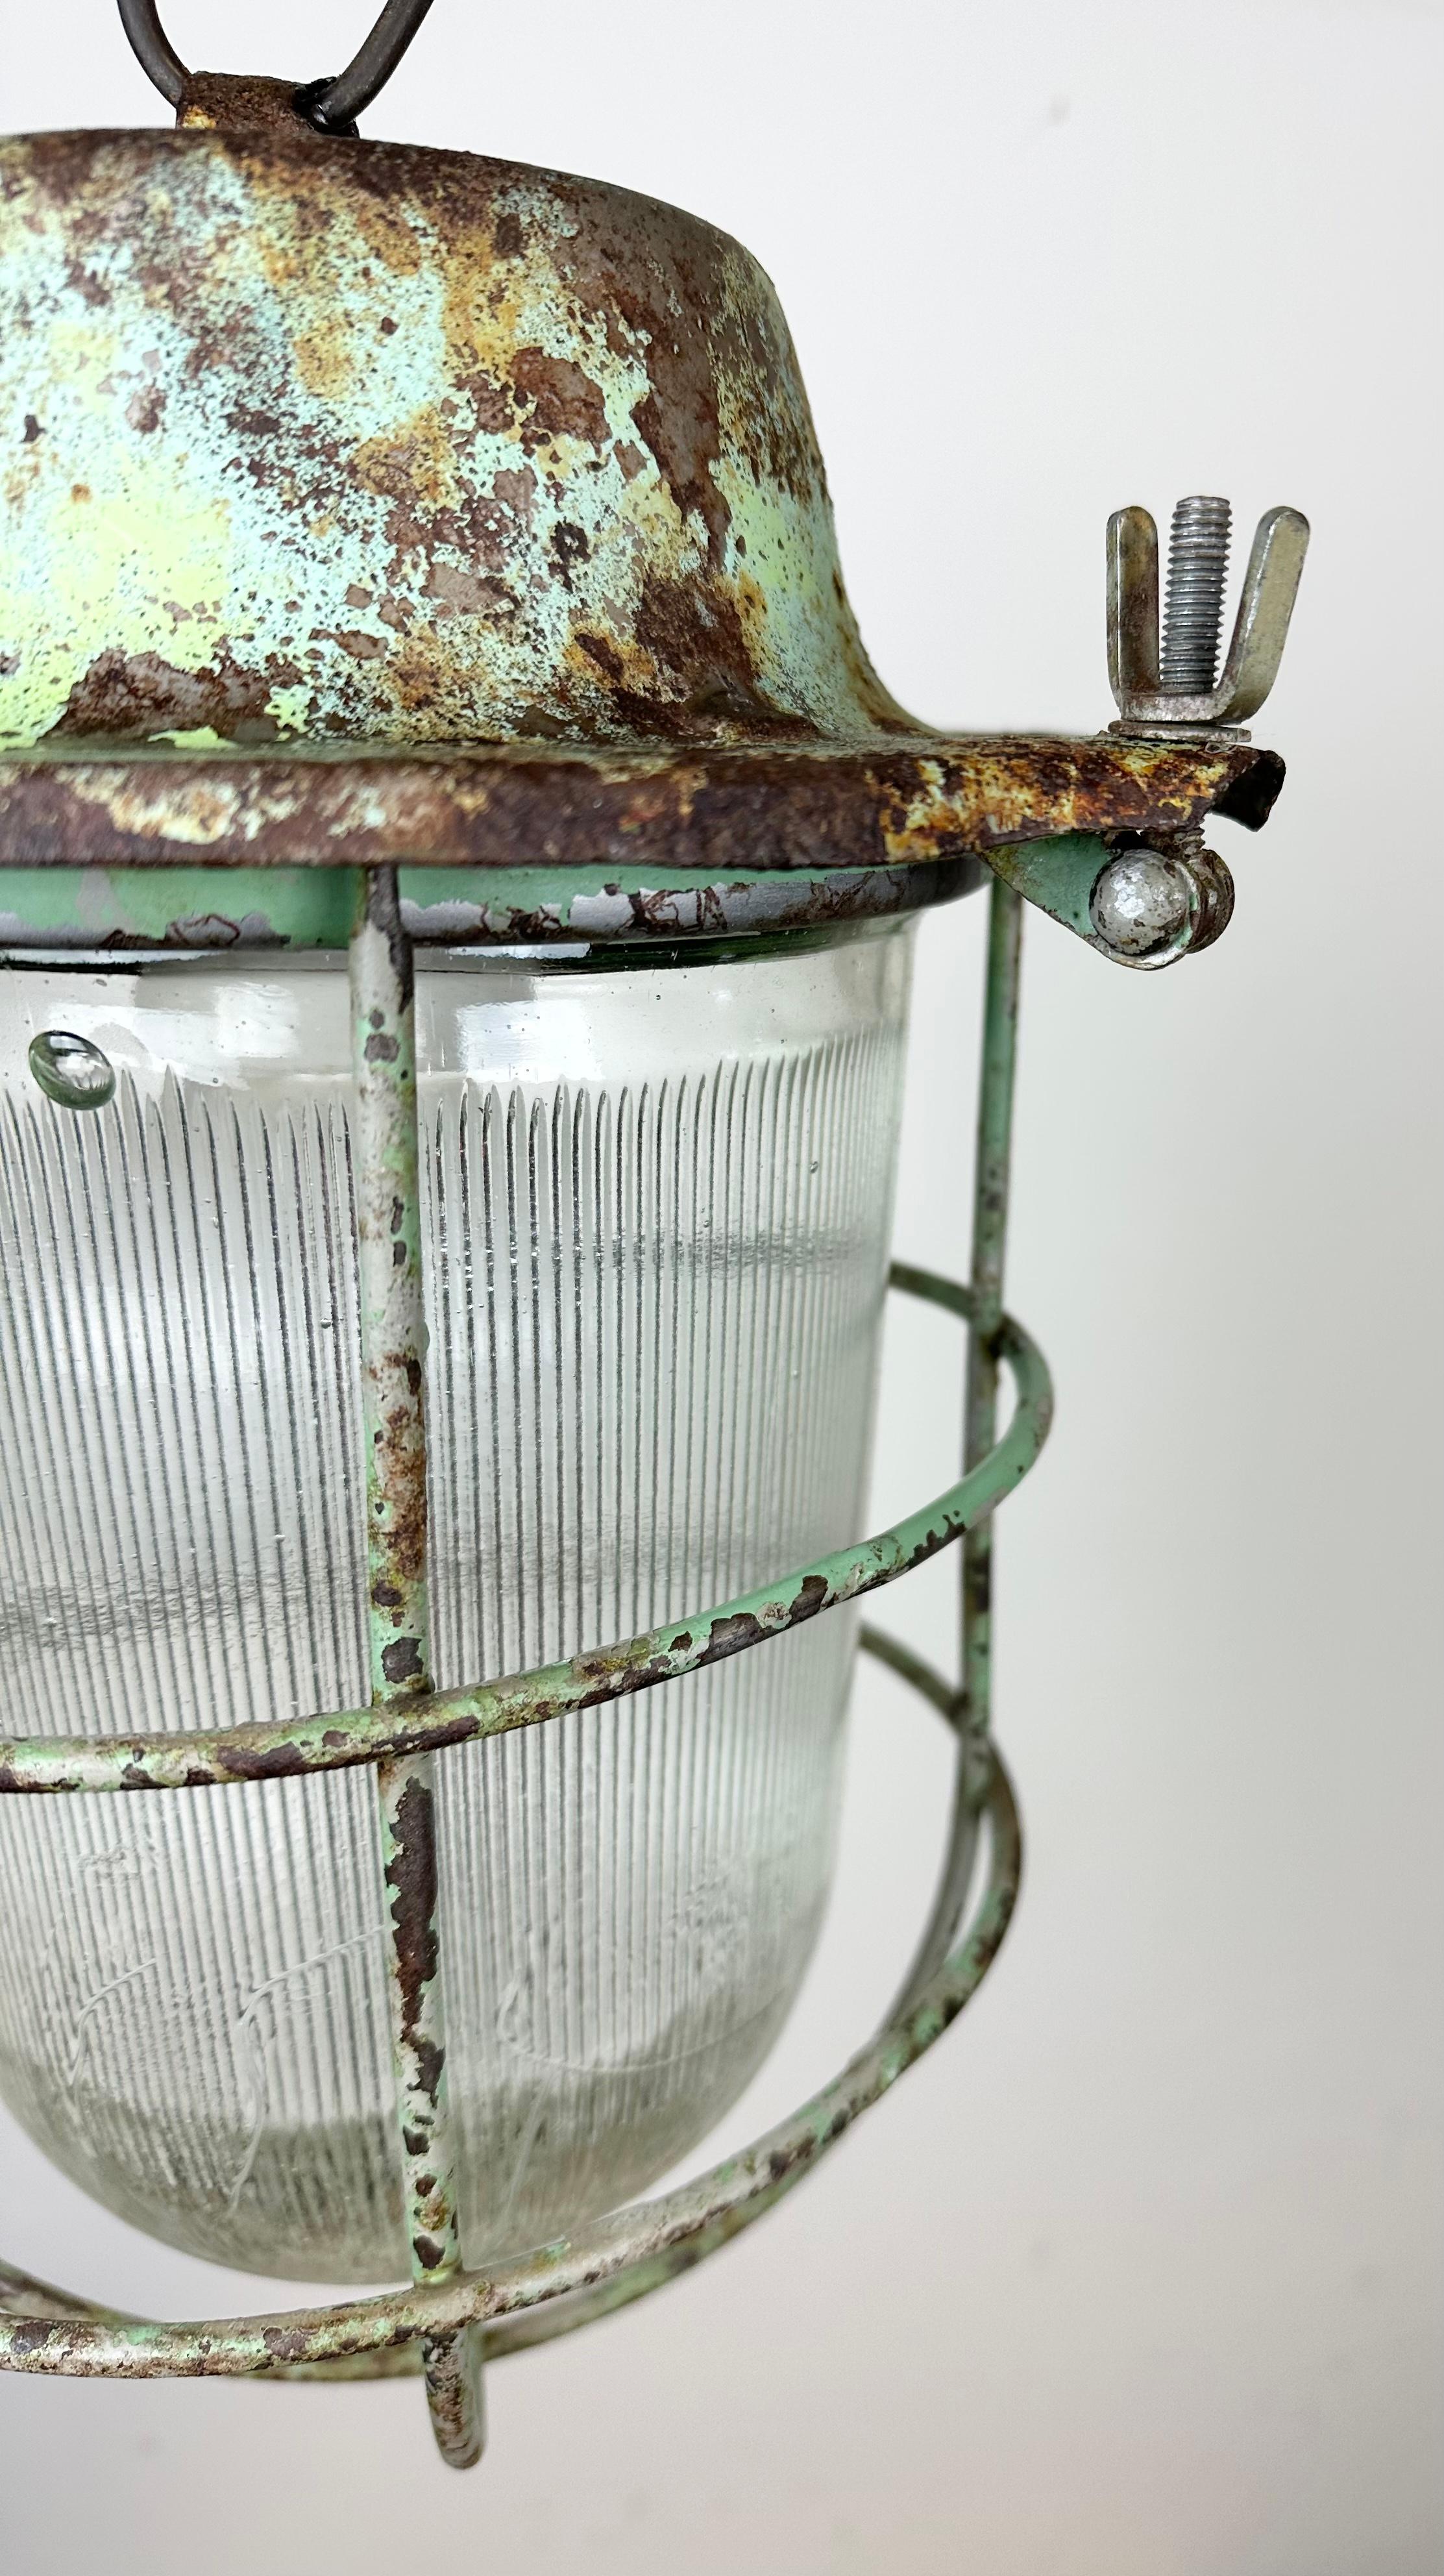 Green Industrial Soviet Bunker Pendant Light with Iron Grid, 1960s For Sale 4